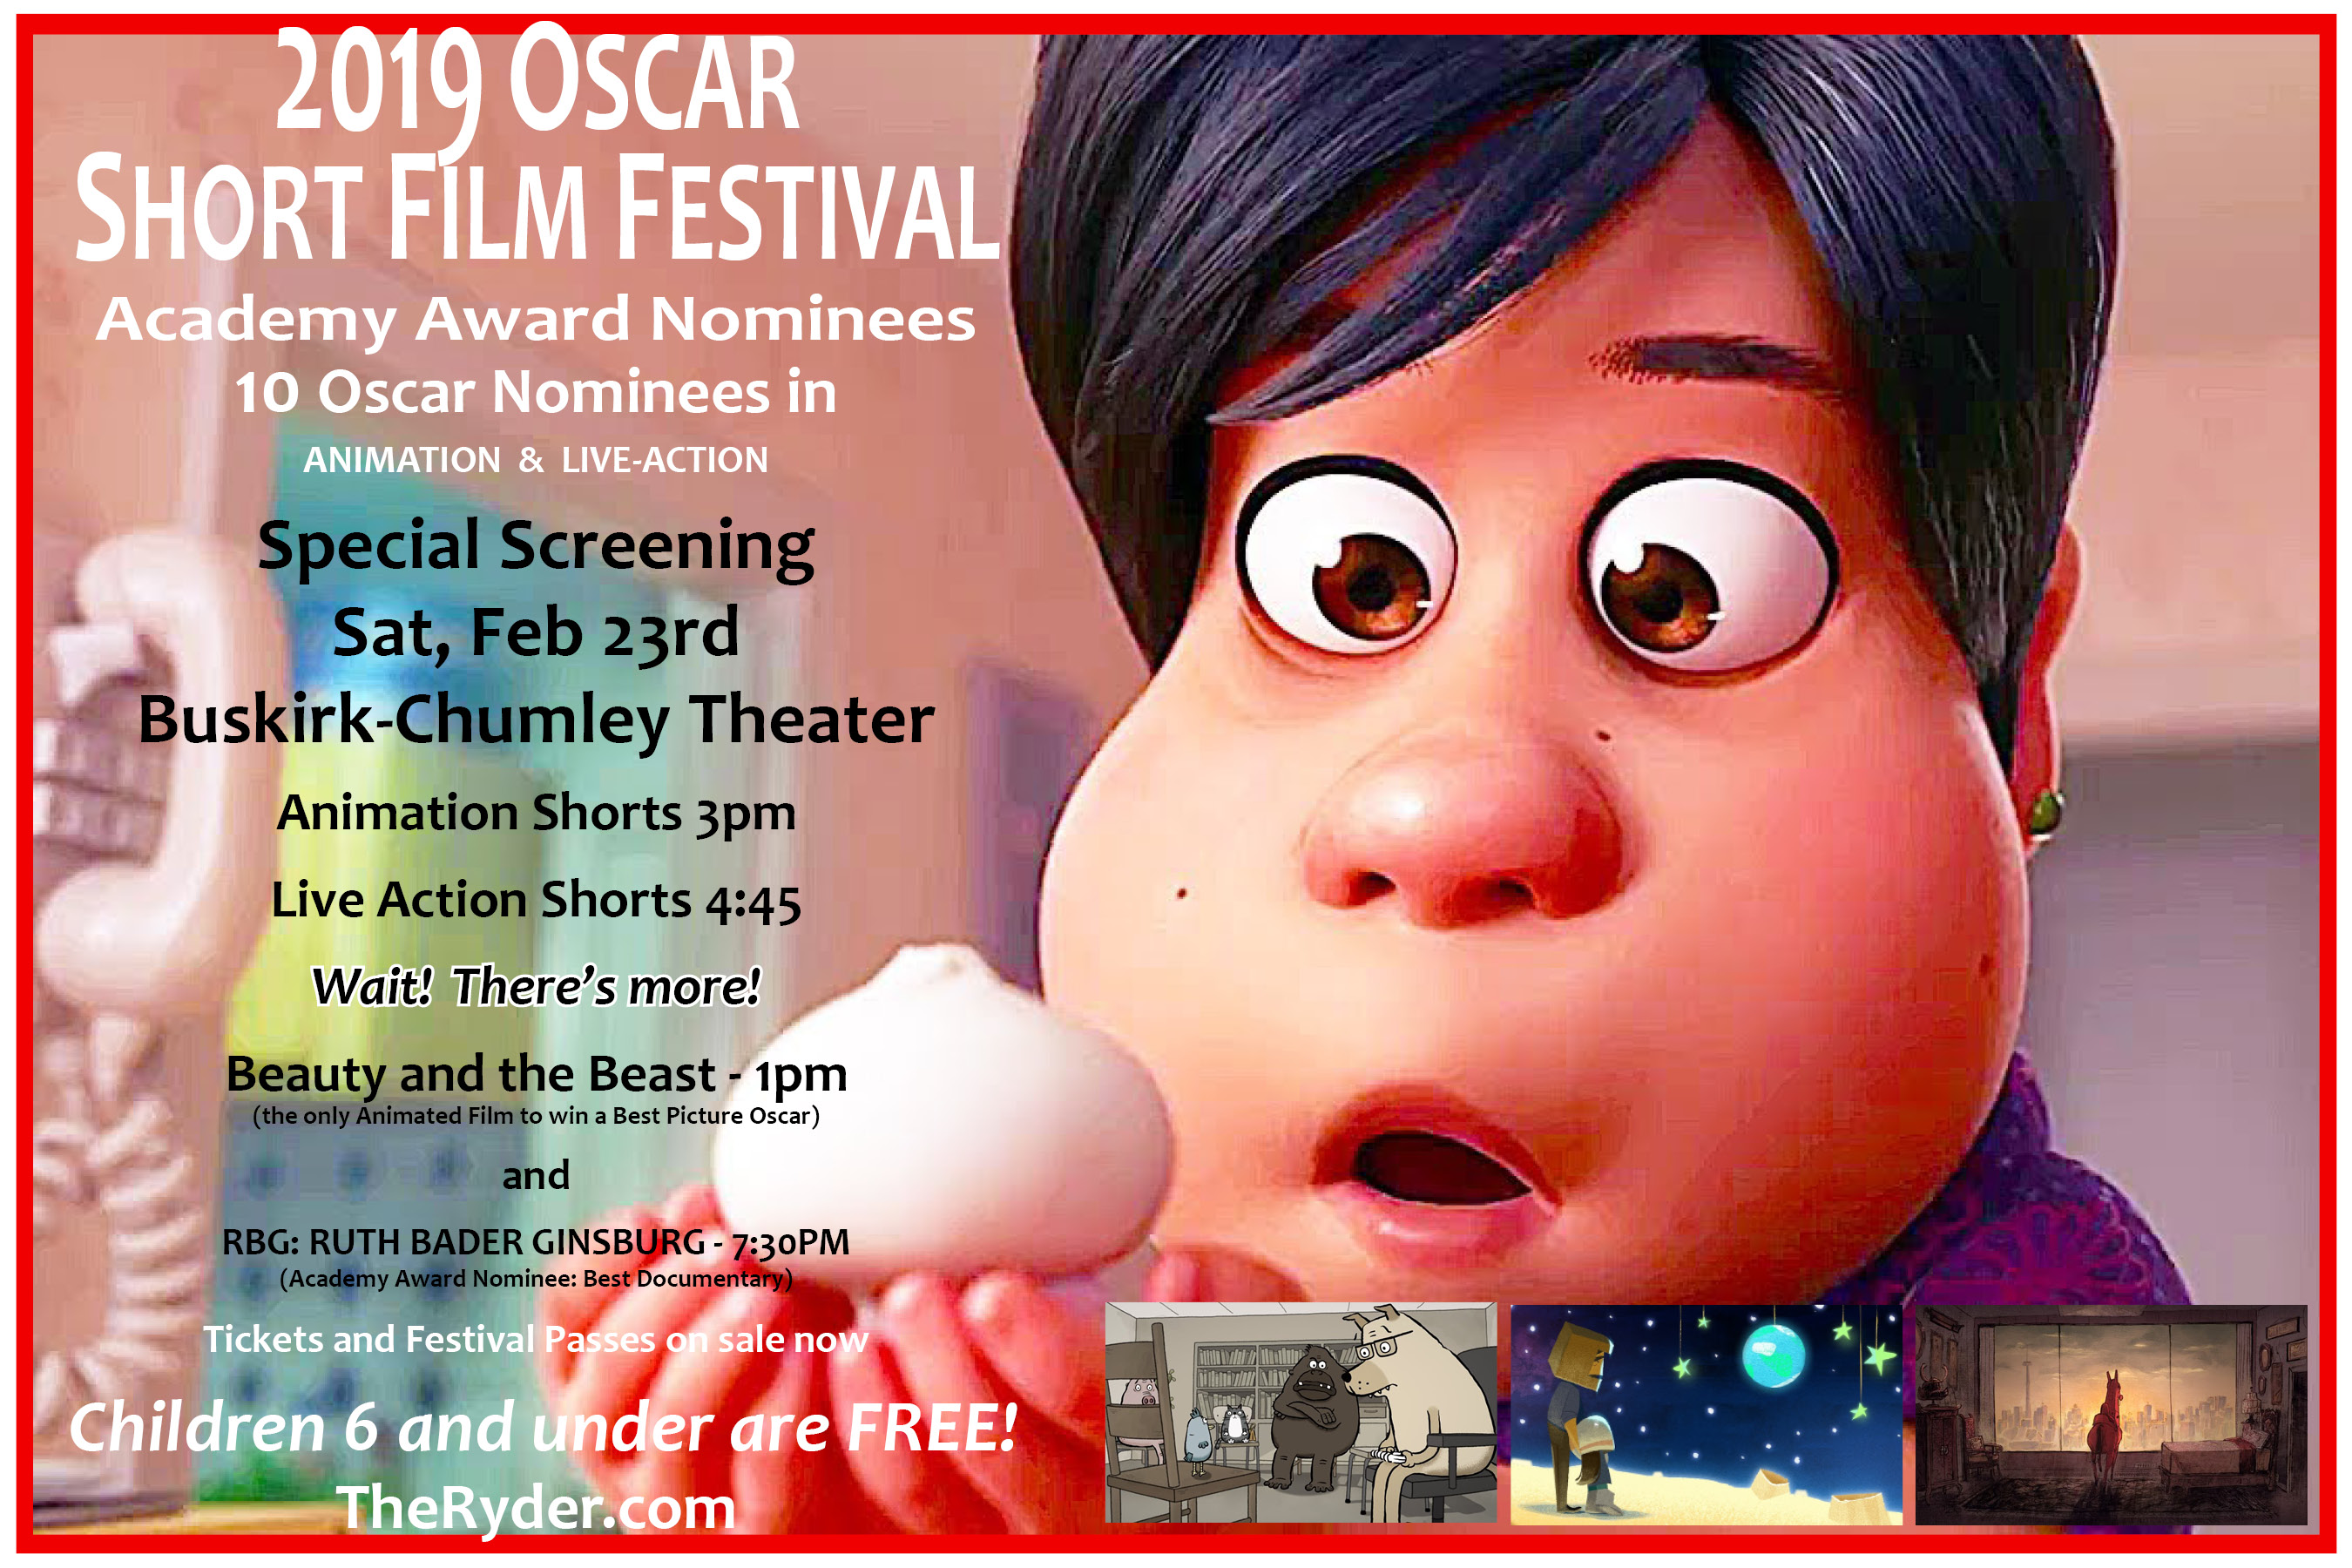 2019 Oscar Short Film Festival at the Buskirk Chumley Theater on Saturday,  Feb 23rd - The Ryder Magazine & Film Series